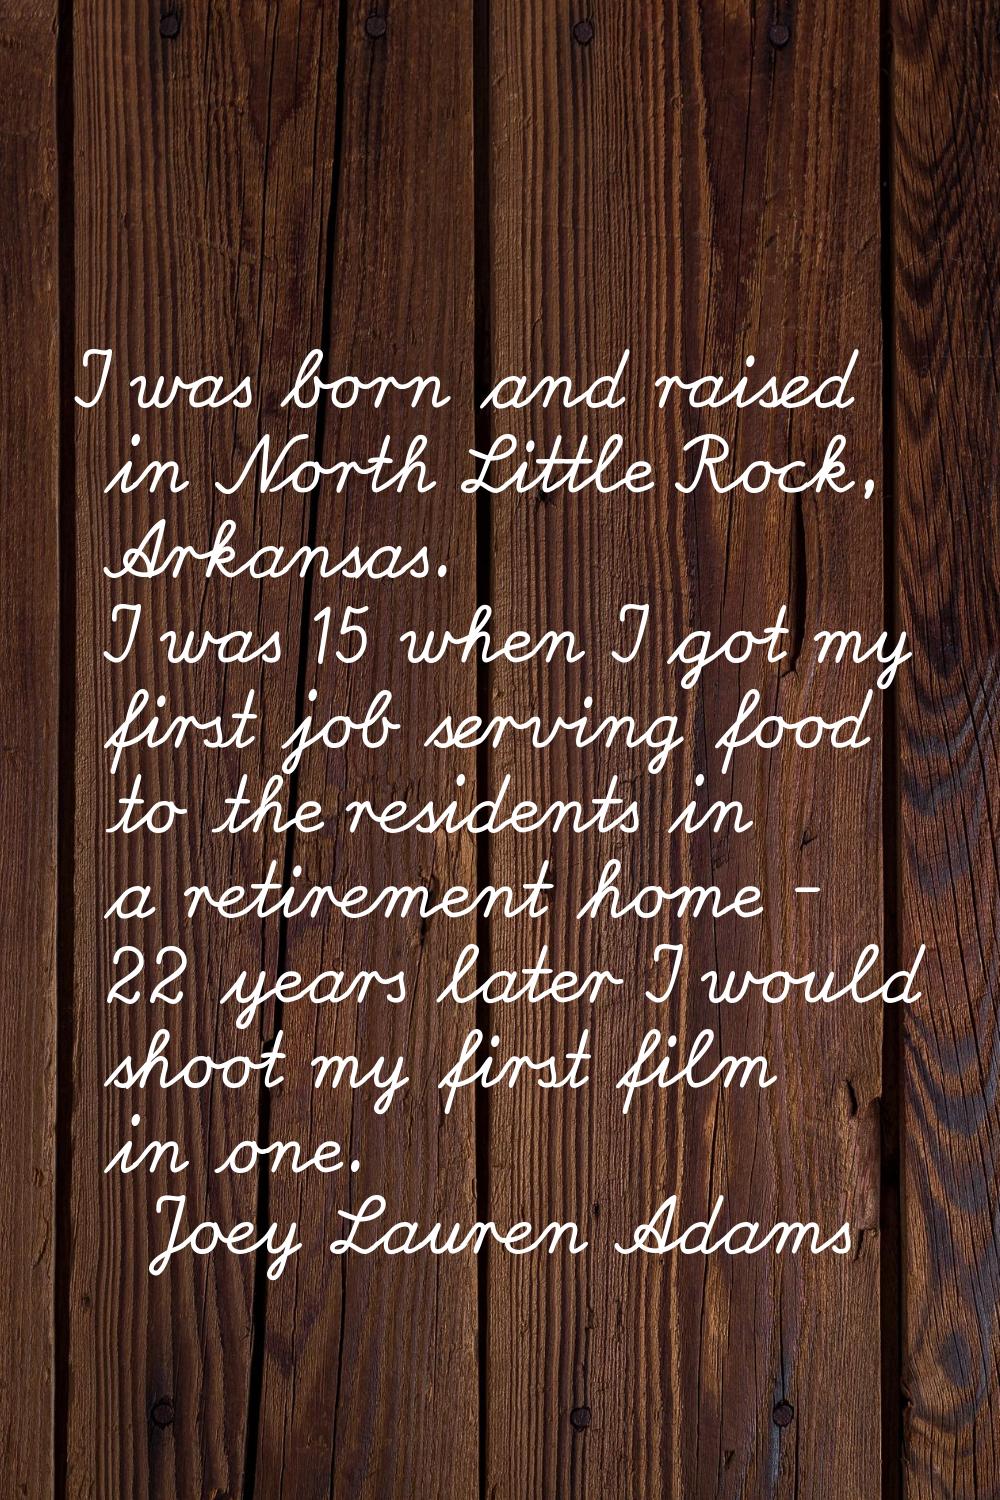 I was born and raised in North Little Rock, Arkansas. I was 15 when I got my first job serving food